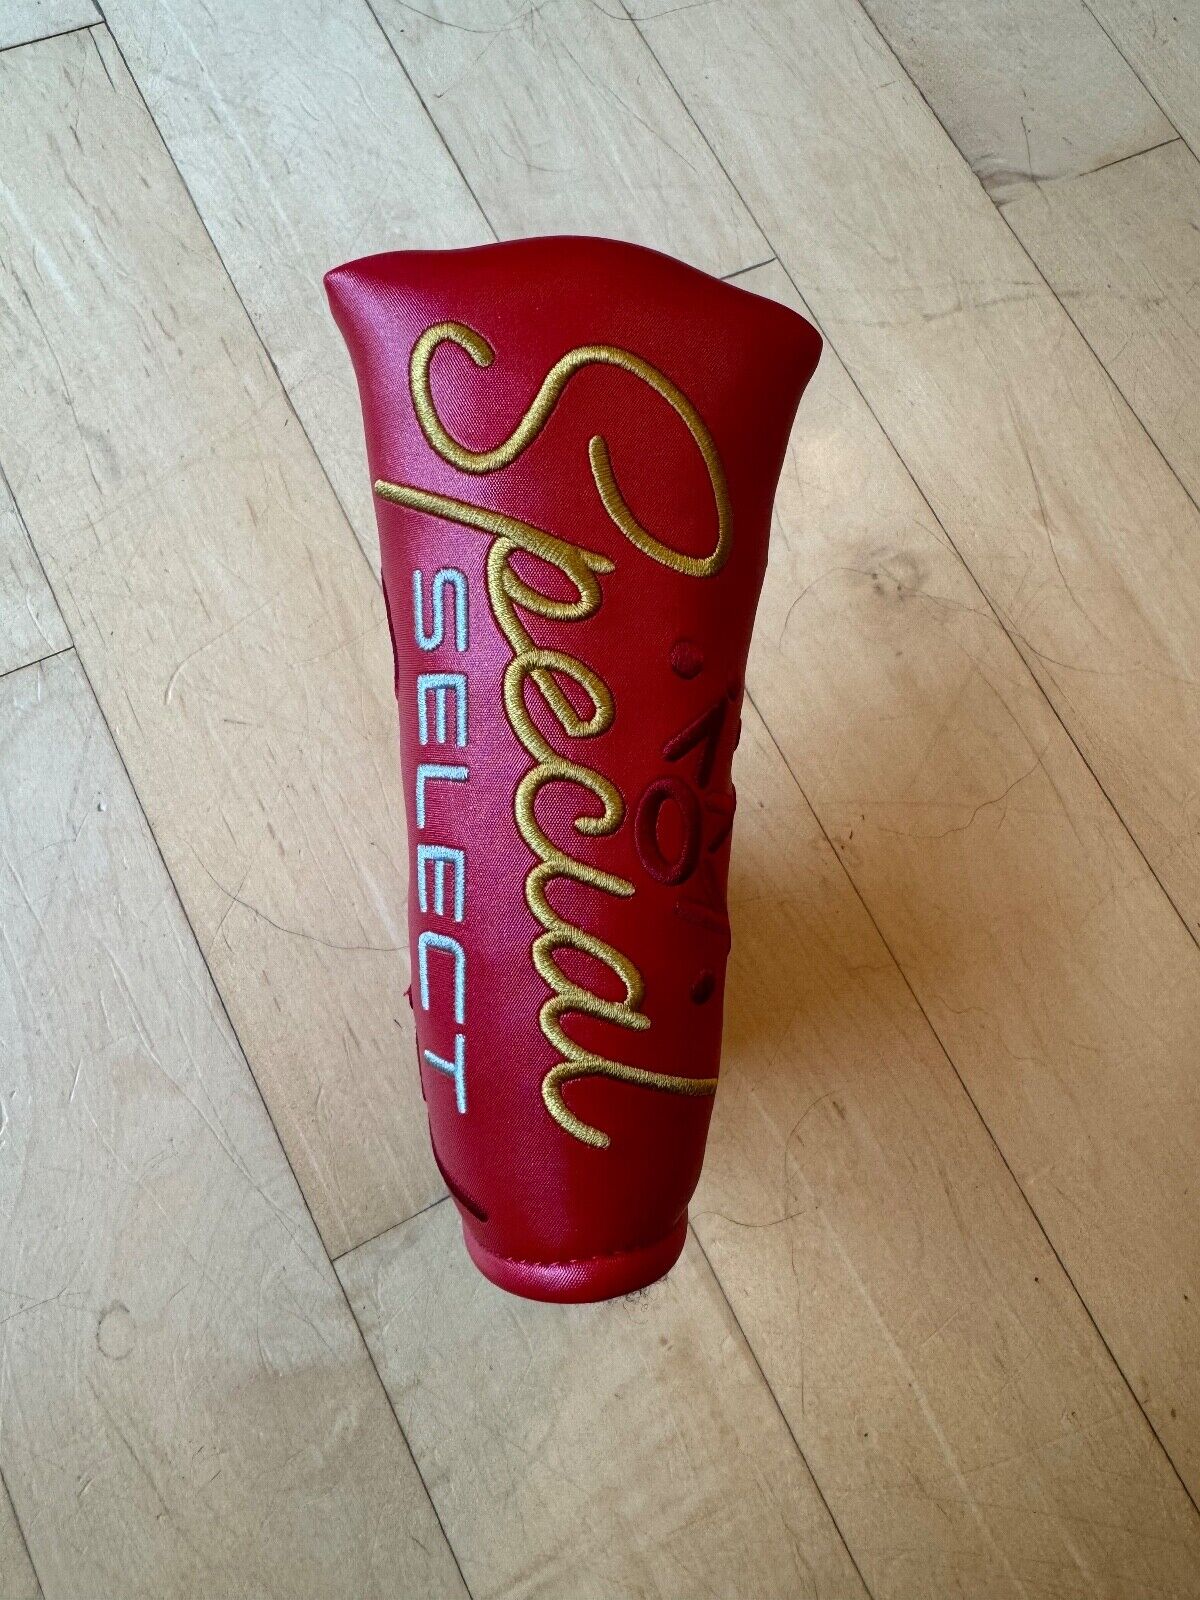 Scotty Cameron Special Select Blade Putter Headcover Red - New